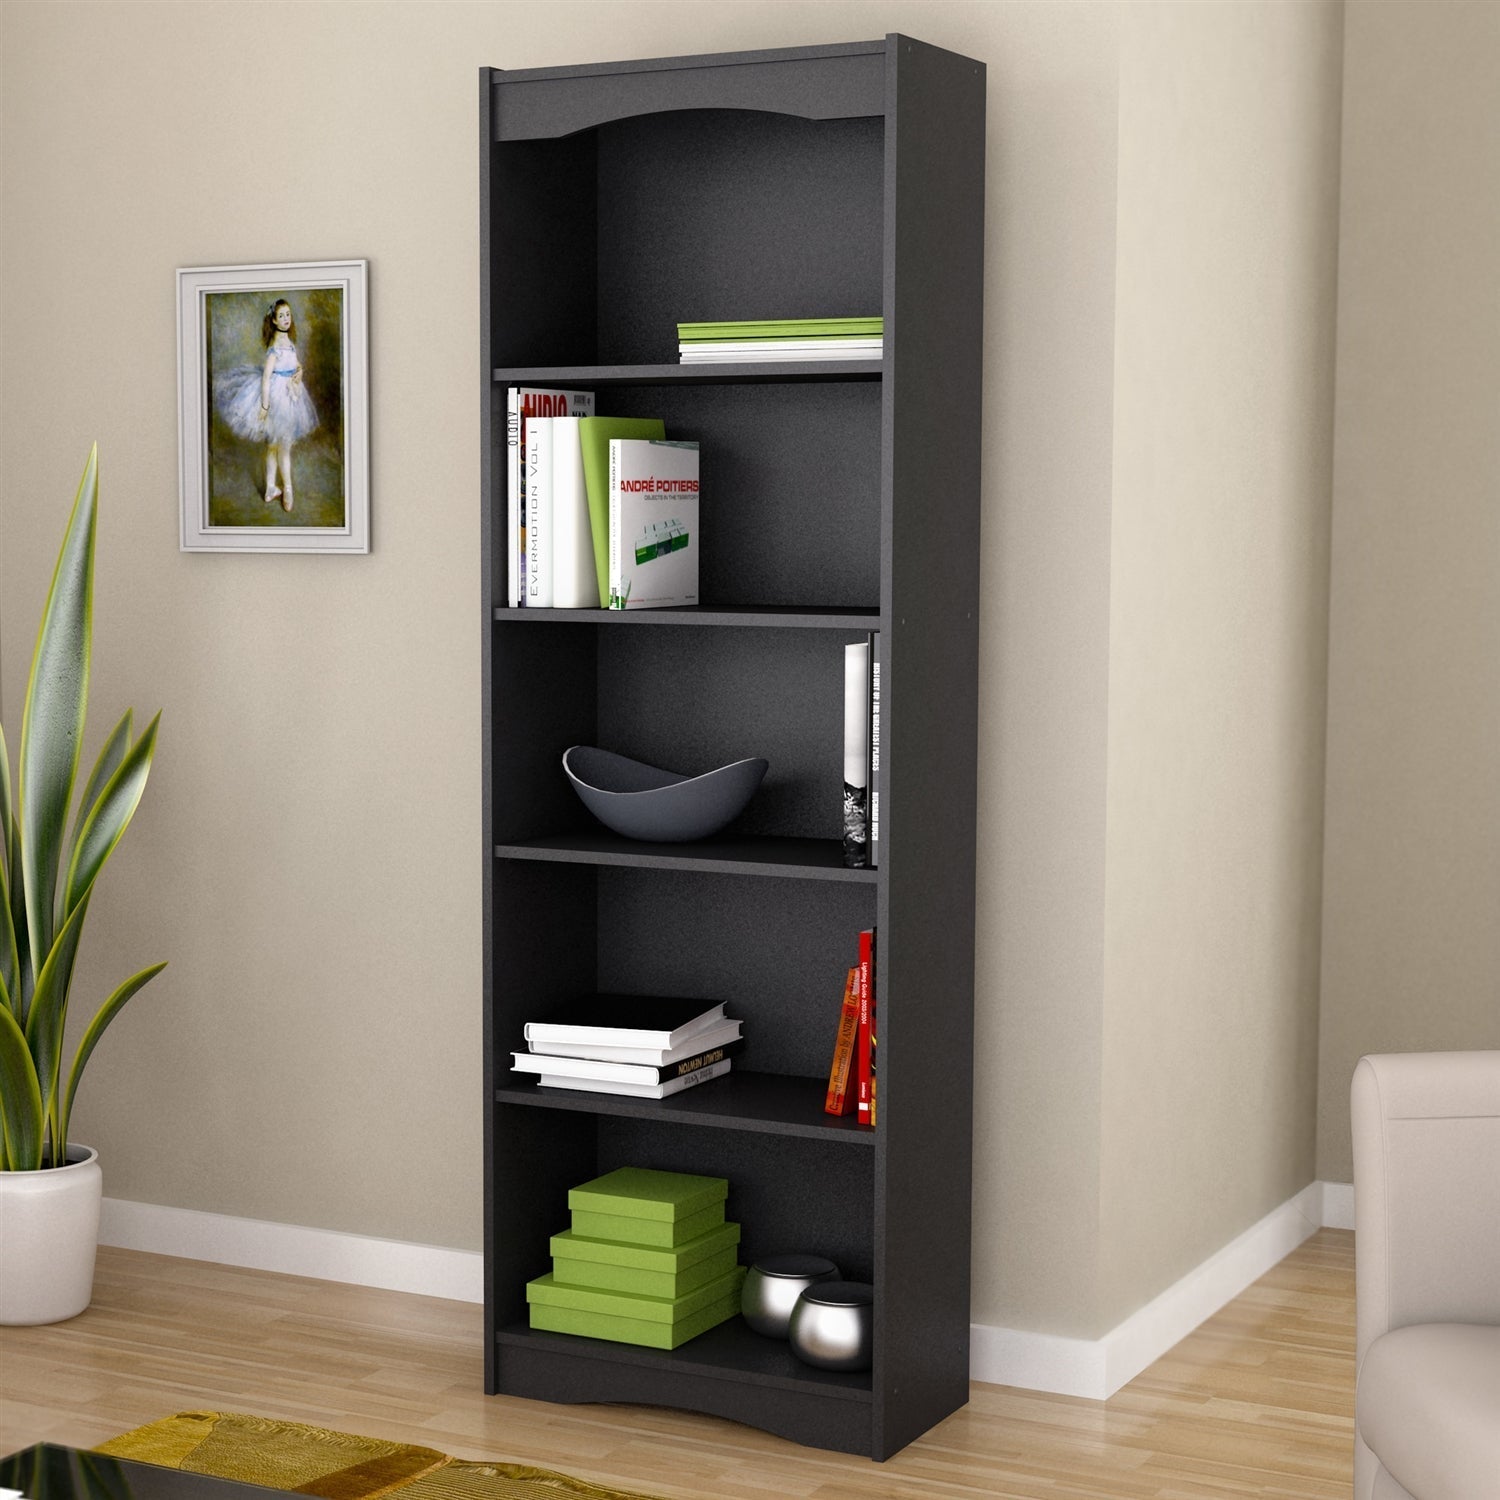 Living Room > Bookcases - Contemporary Black Bookcase With 5 Shelves And Curved Accents